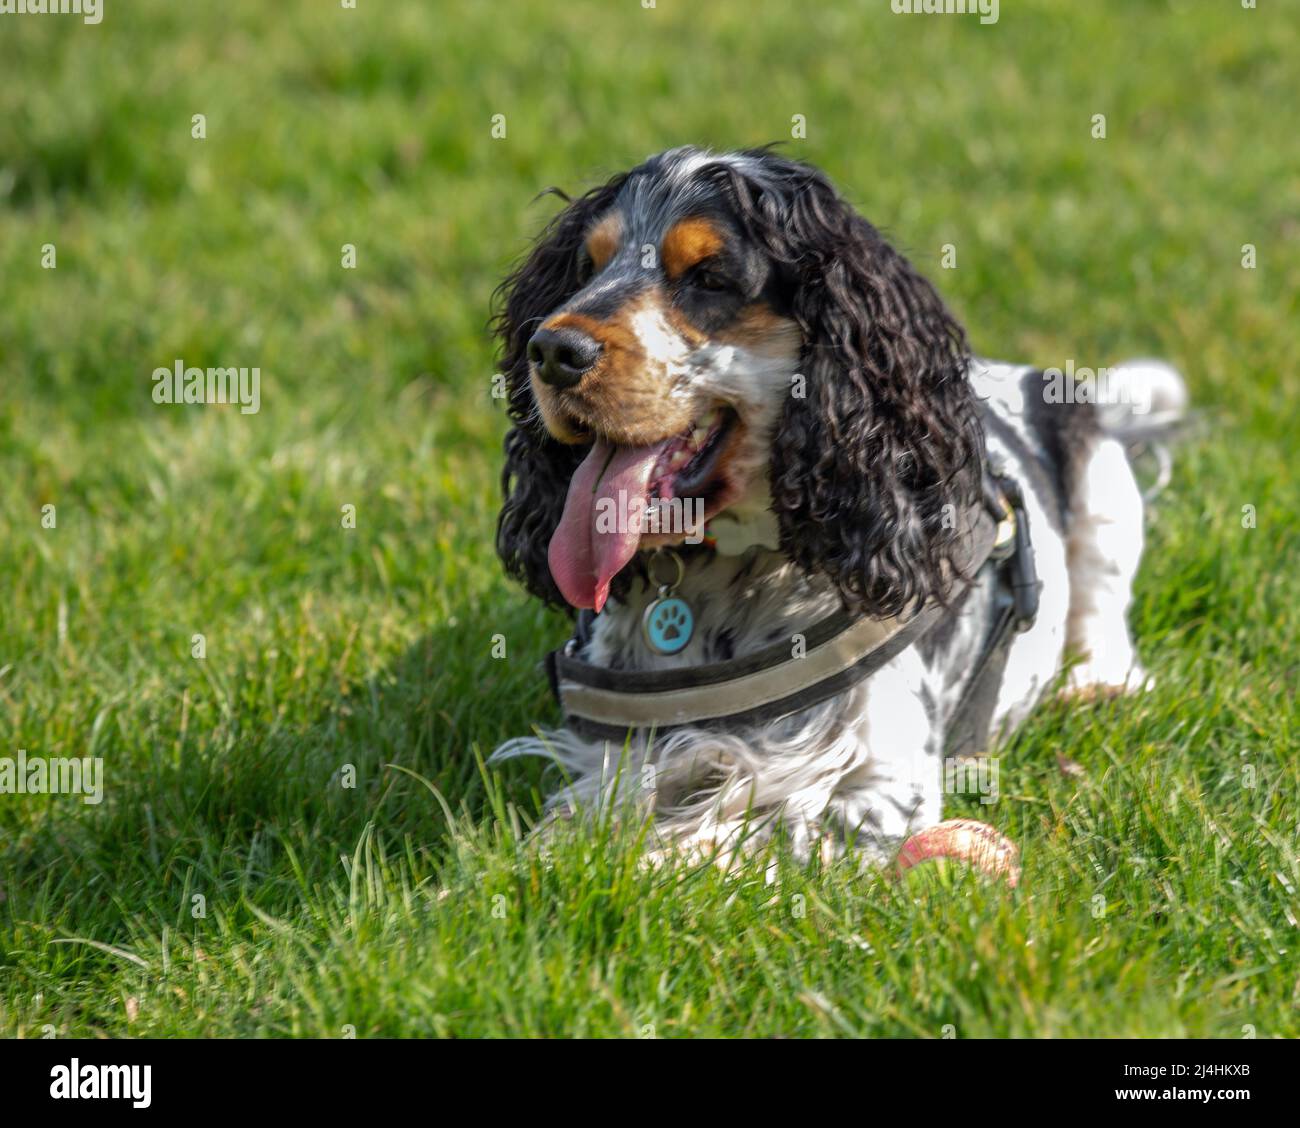 Photographer's own beautiful 4 year old tricolour Cocker Spaniel dog playing with a ball on grass on a sunny day Stock Photo